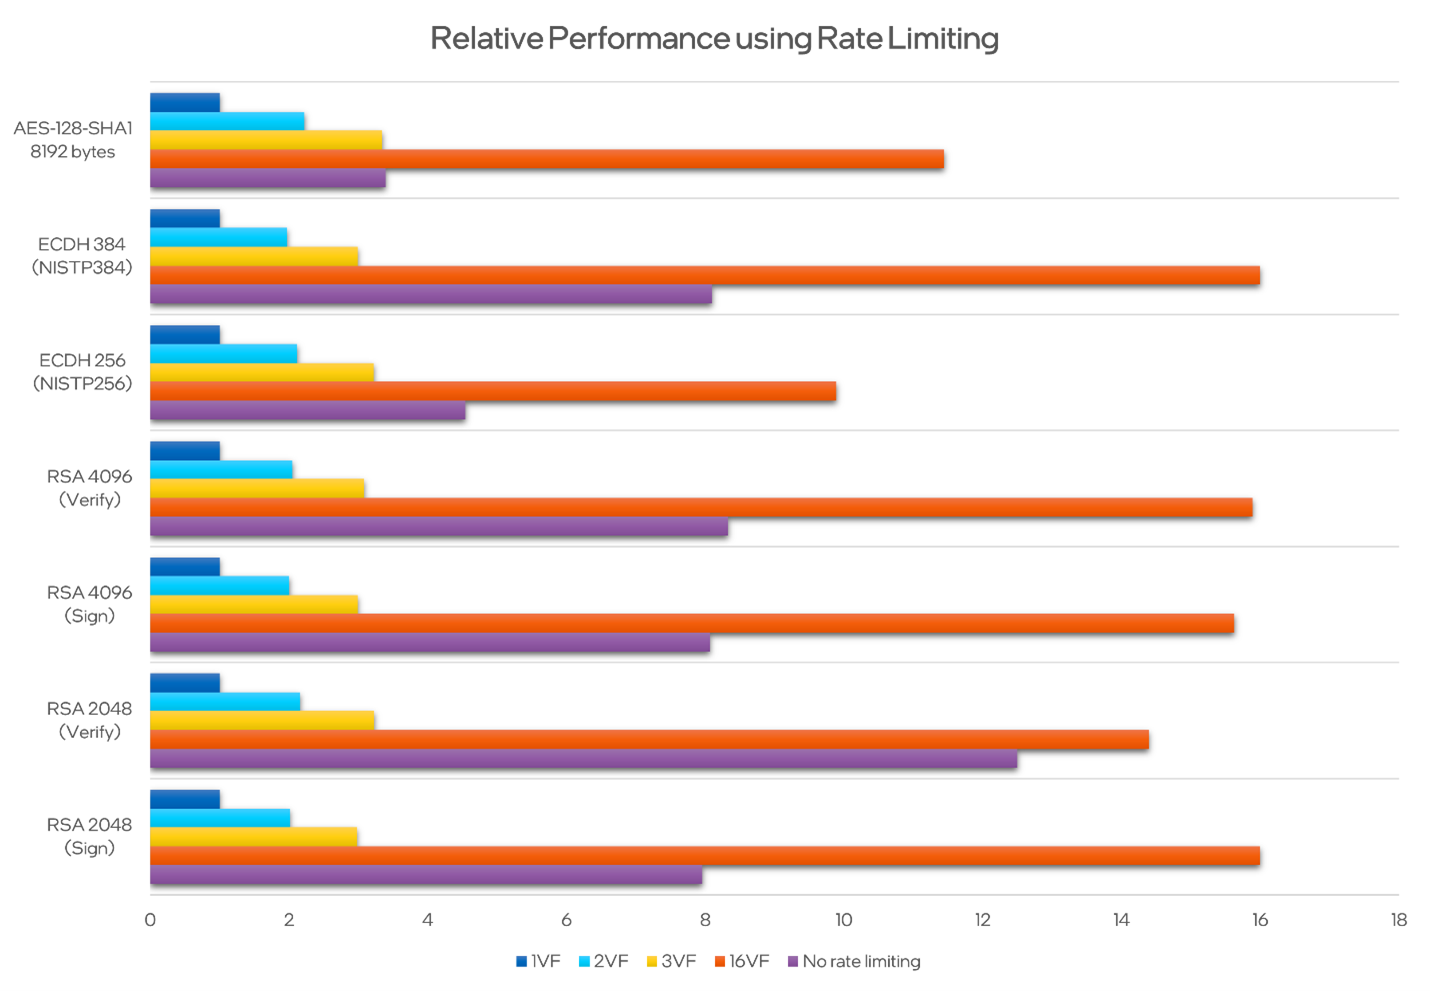 bar graph for the relative performance that uses rate limiting